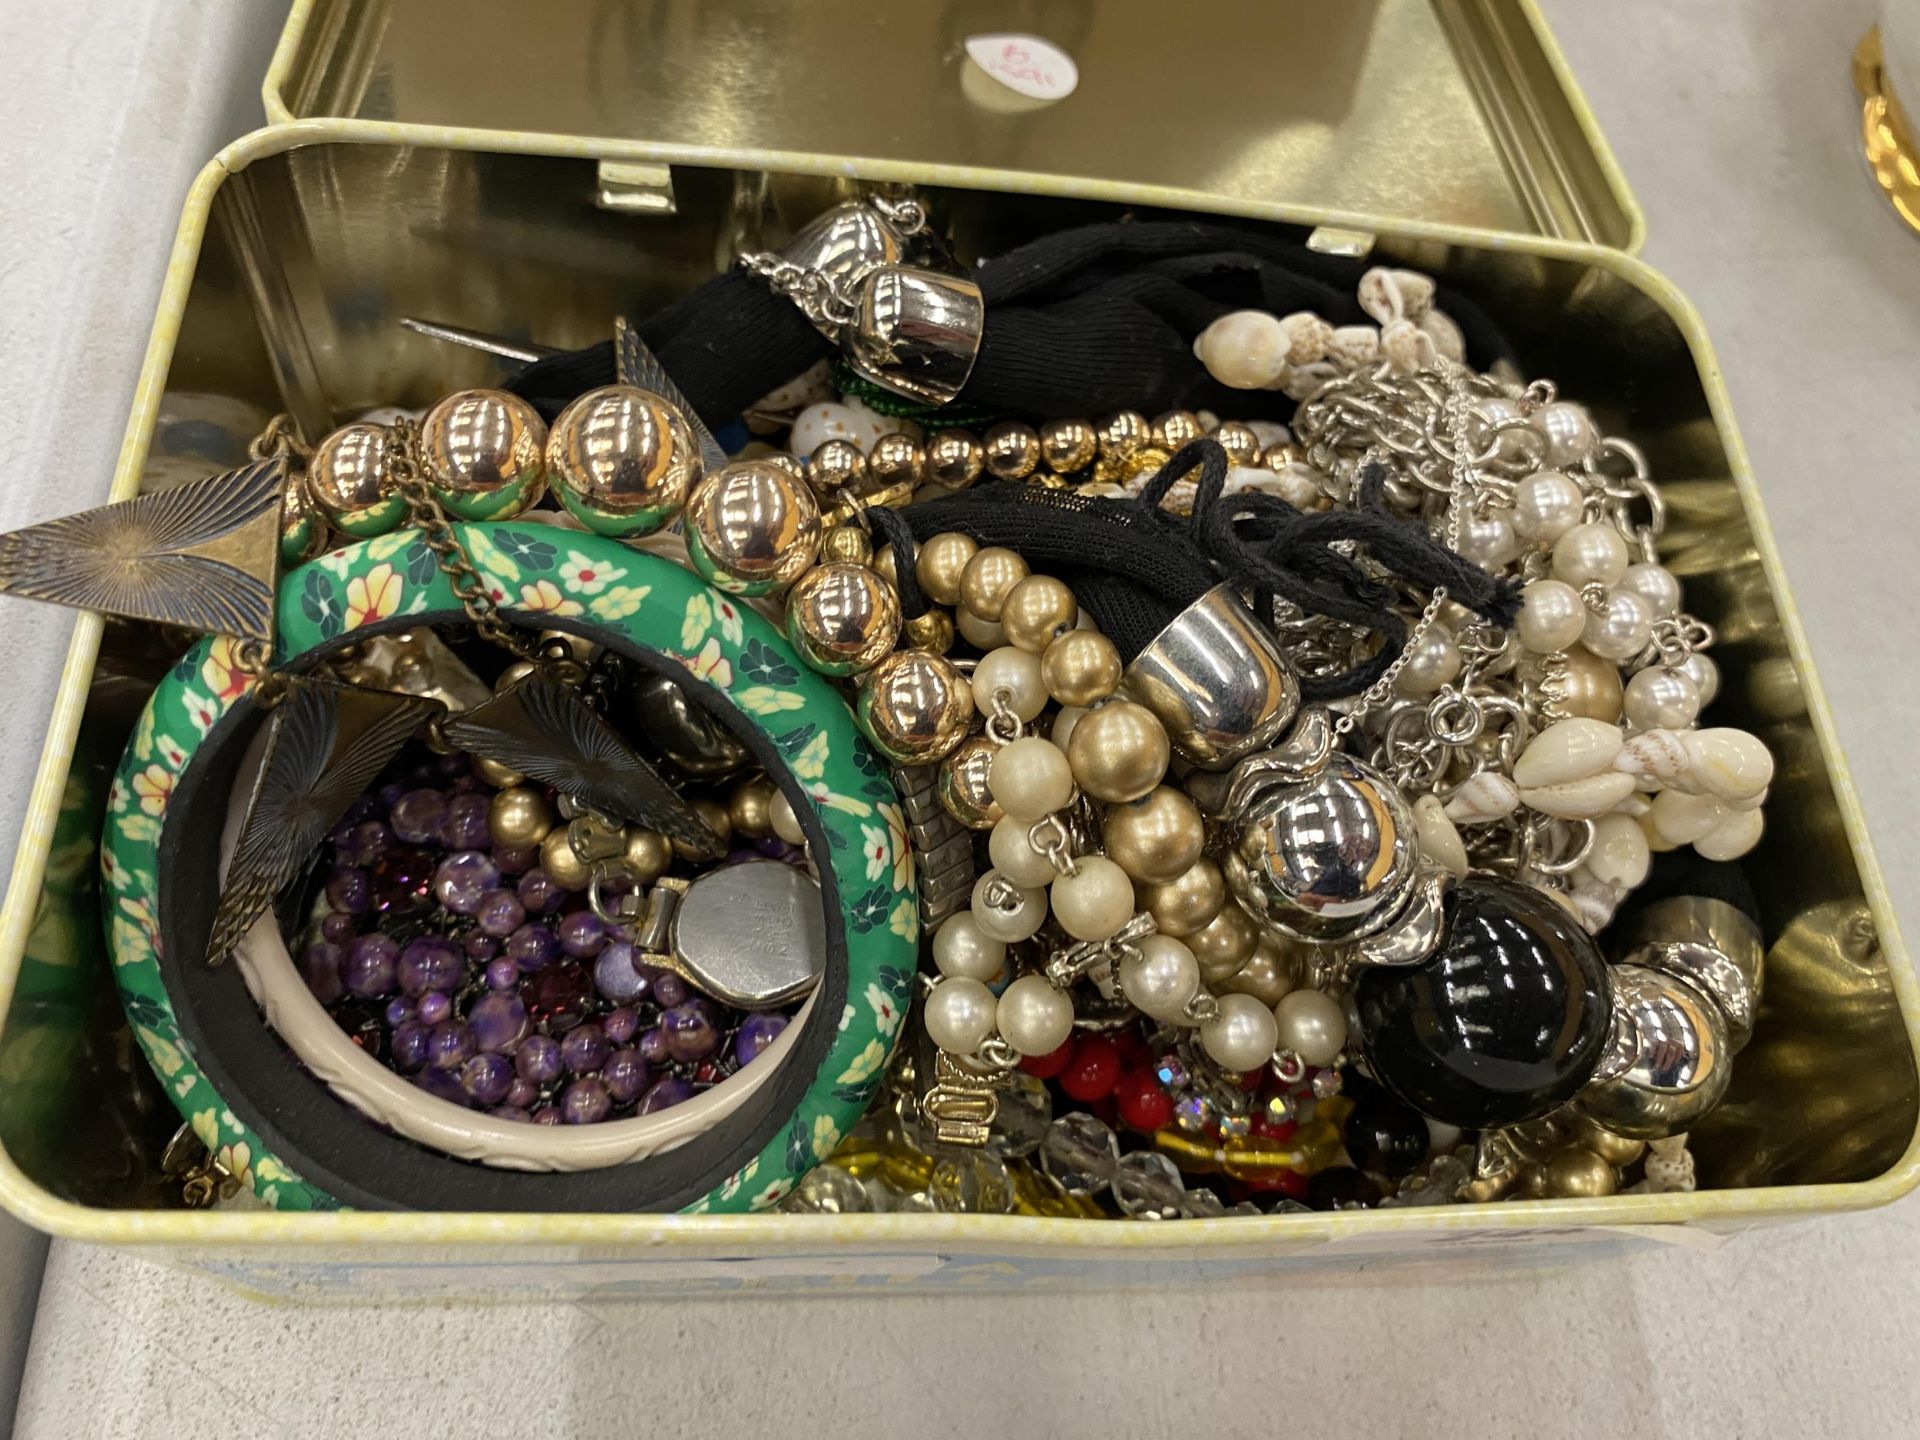 A LARGE QUANTITY OF COSTUME JEWELLERY TO INCLUDE BEADS, NECKLACES, BANGLES, ETC - Image 2 of 3